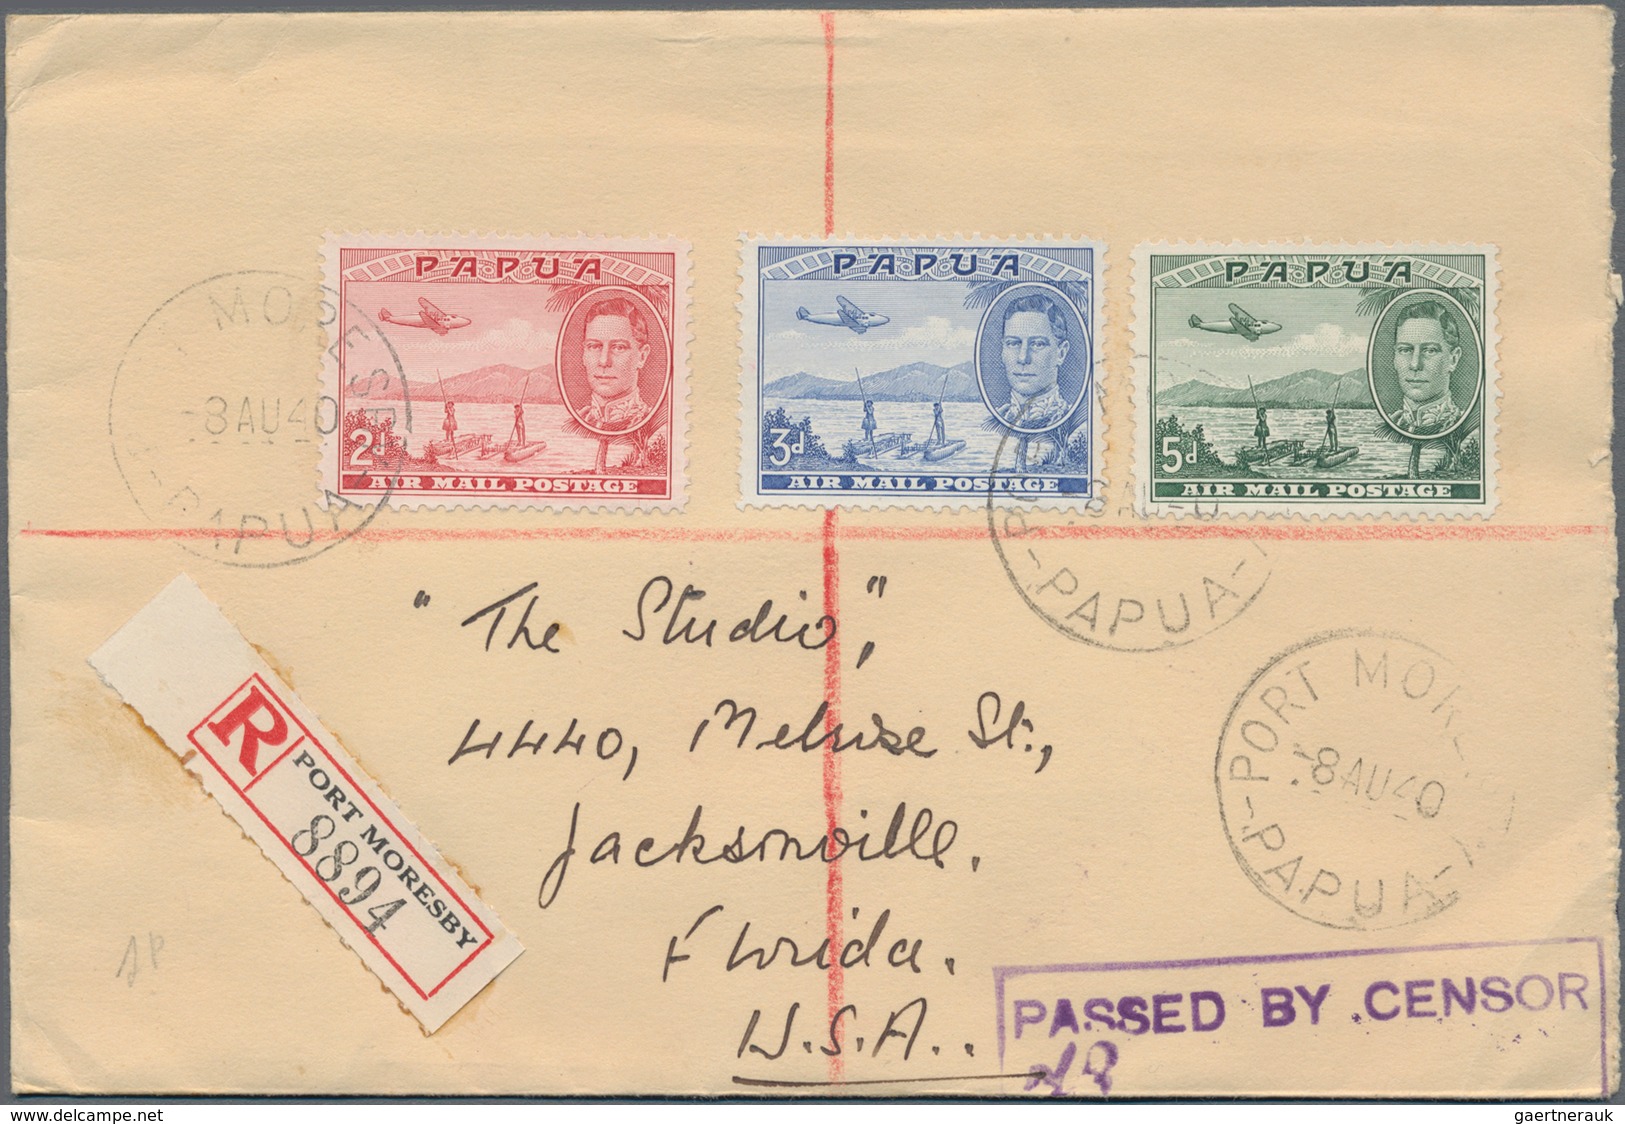 Papua: 1934-40 Lot Of 9 Covers And FDC's Including Registered Mail, First Flights, Censored Mail Etc - Papua Nuova Guinea